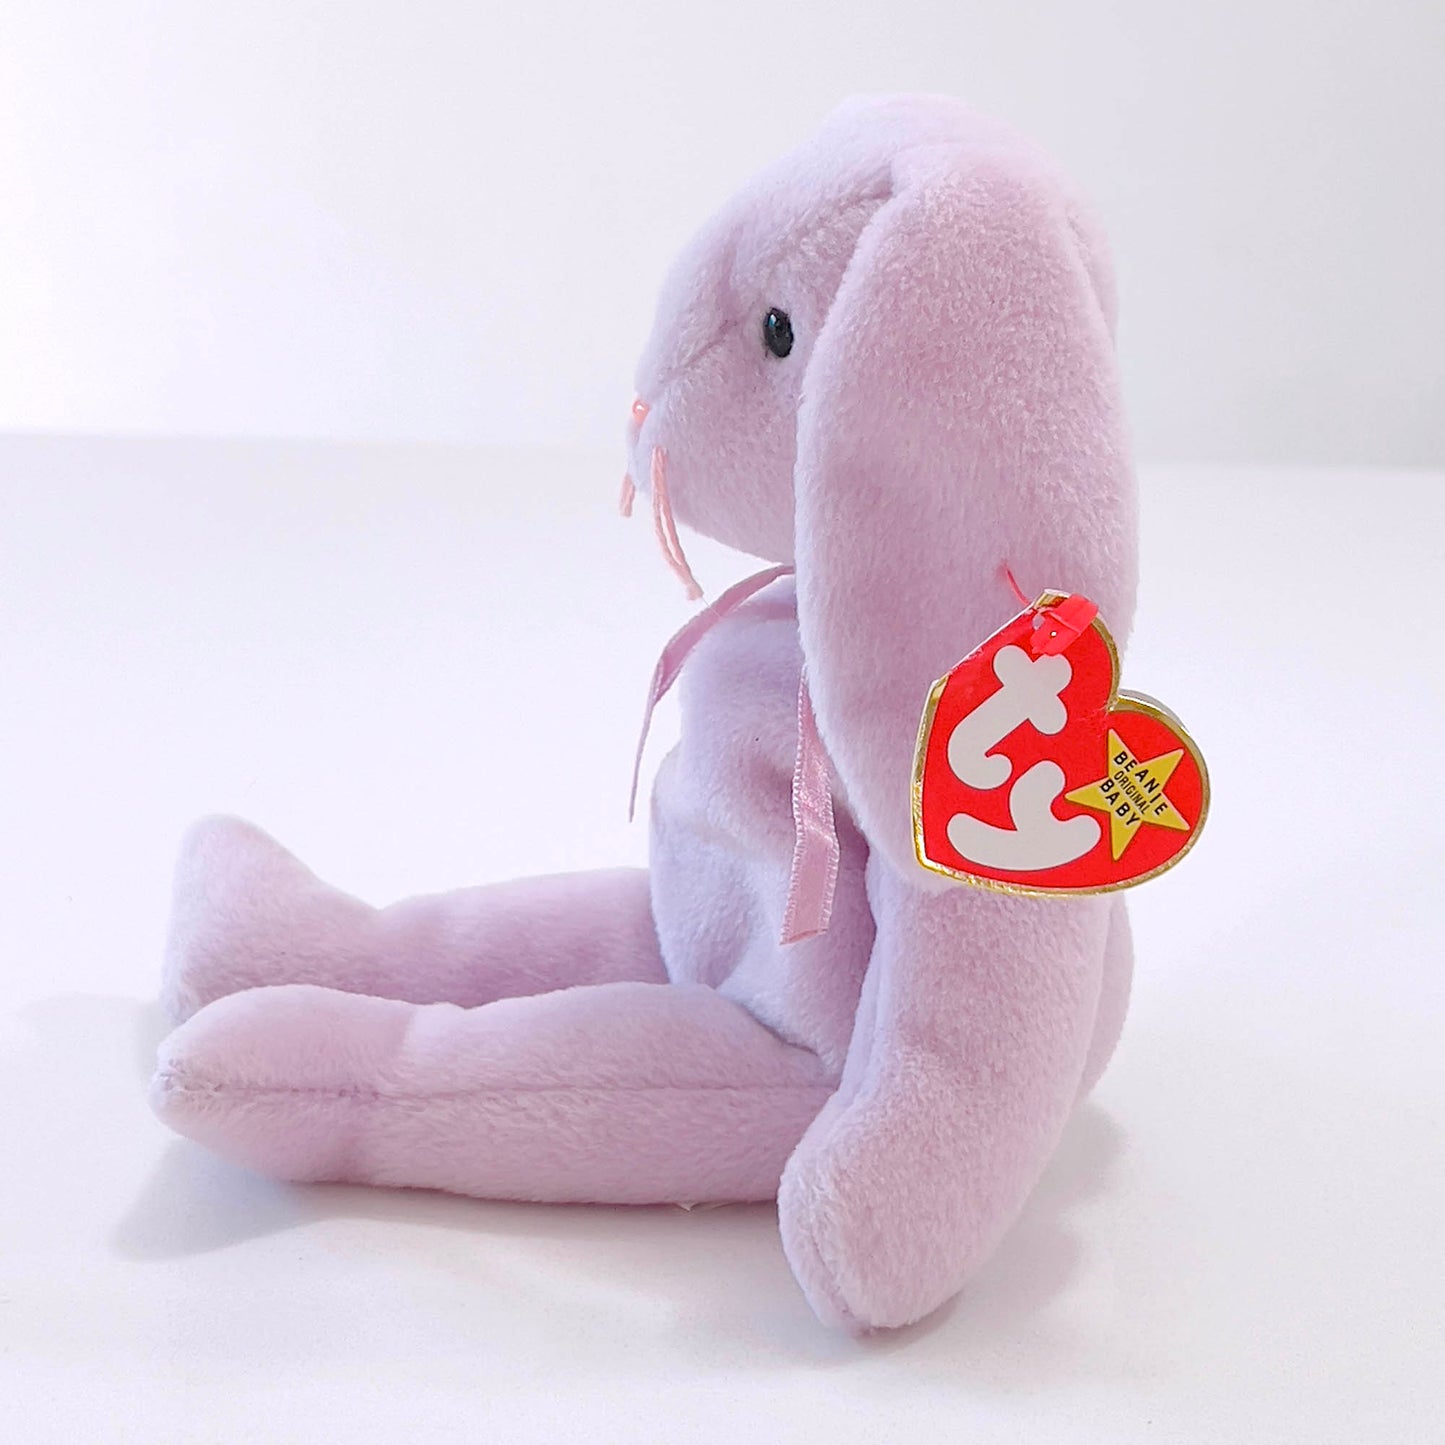 Ty-Floppity-Bubby-Rabbit-Stuffed-Toy-1996.-Side-view-2.-Original-Beanie-Babies-Collection